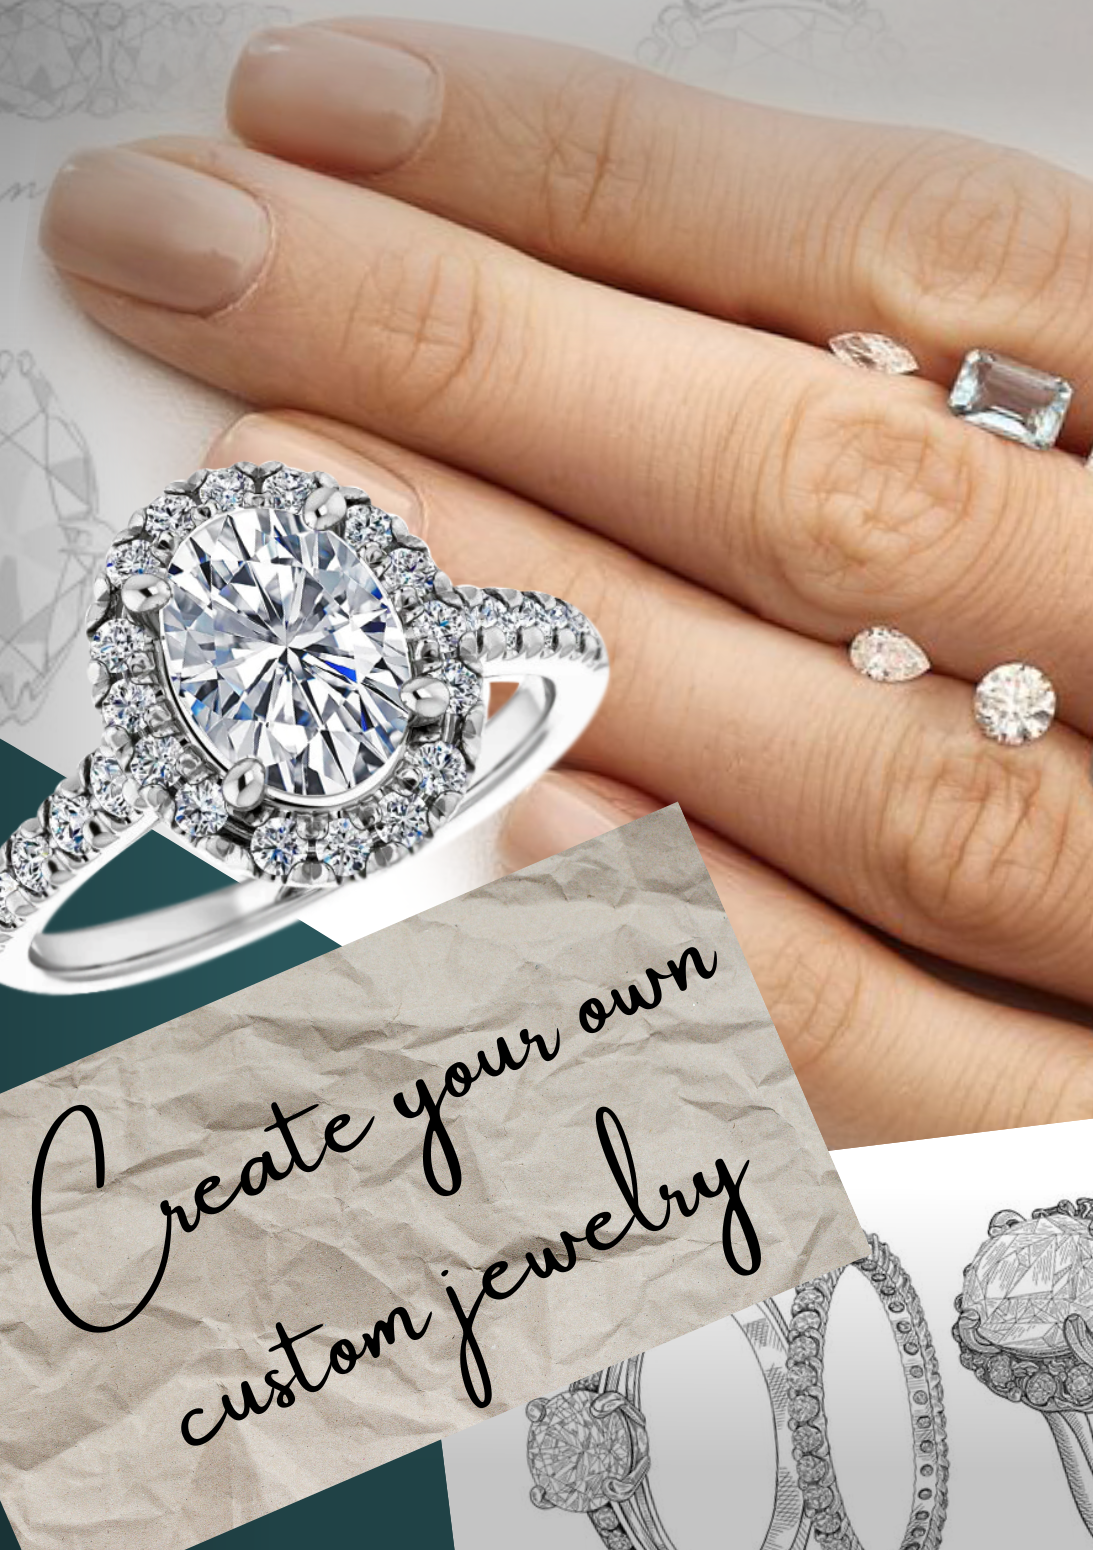 A ring, a woman's hand with loose gemstones, sketches of jewelry. Caption: Create your own custom jewelry